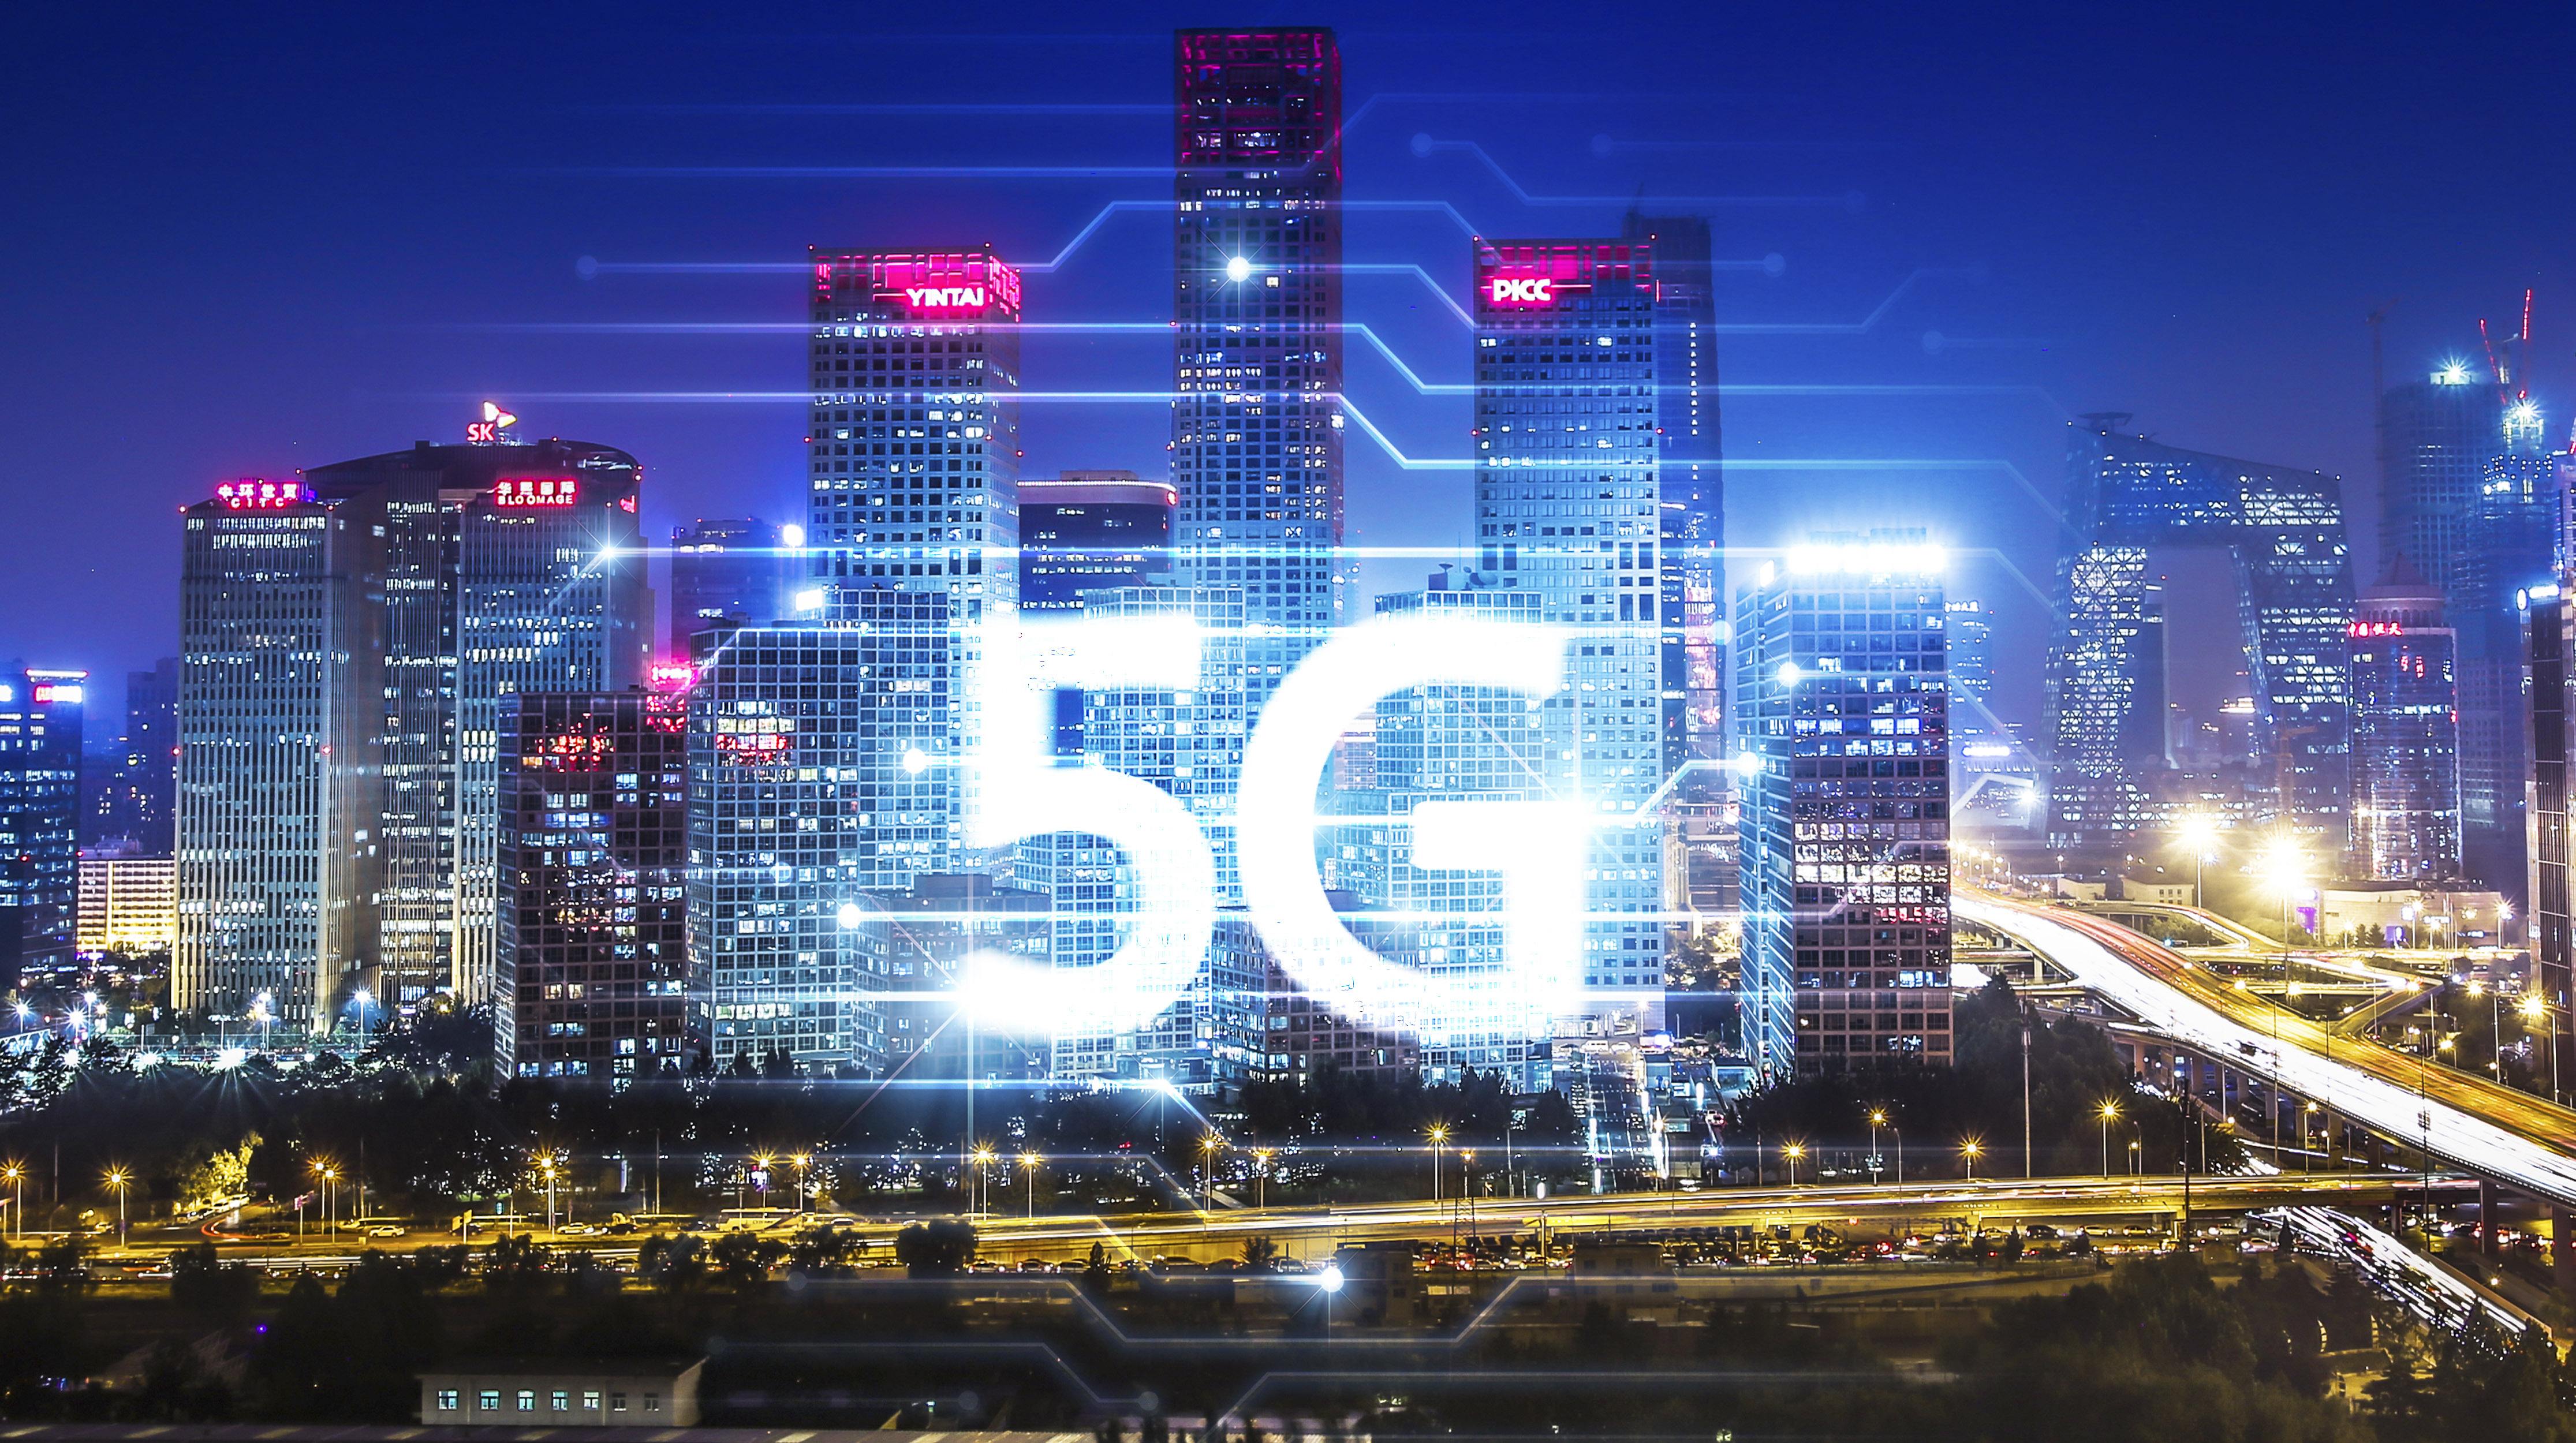 The outlook of the wire and cable industry in the 5G era